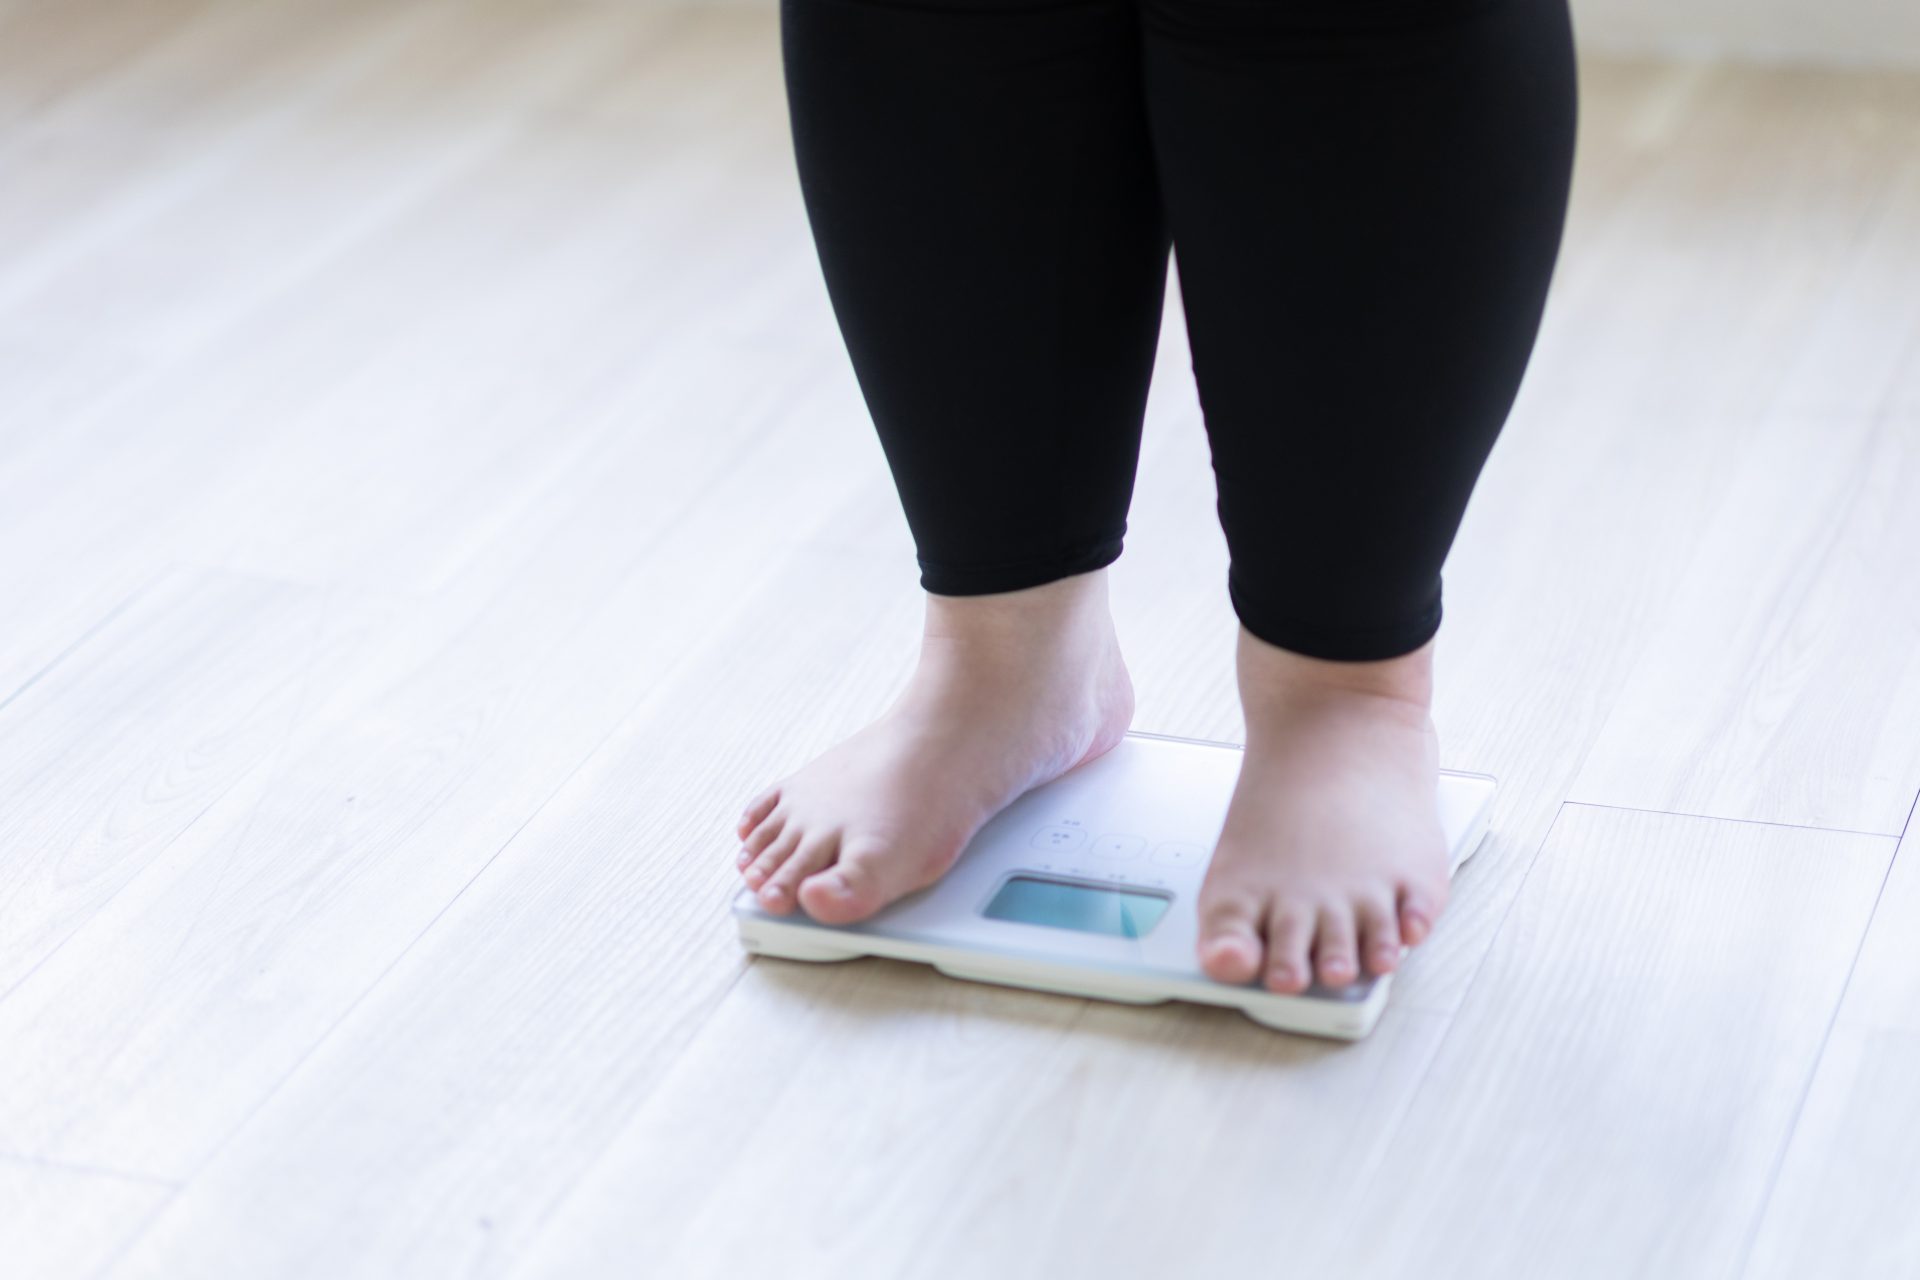 A woman's weight can affect her salary